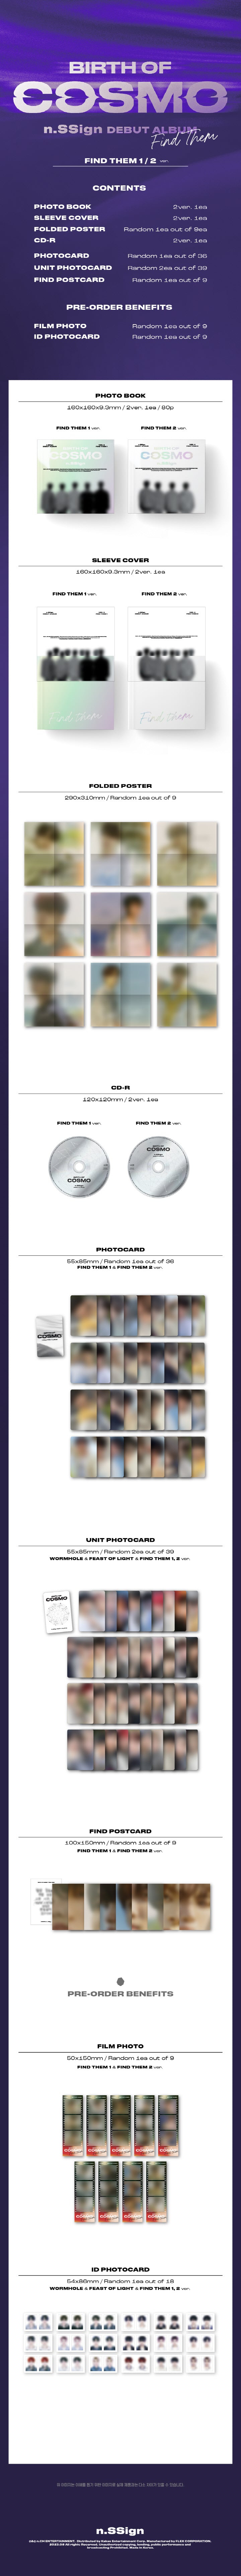 1 CD
1 Photo Book (80 pages)
1 Folded Poster (random out of 9 types)
1 Photo Card (random out of 36 types)
2 Unit Photo Ca...